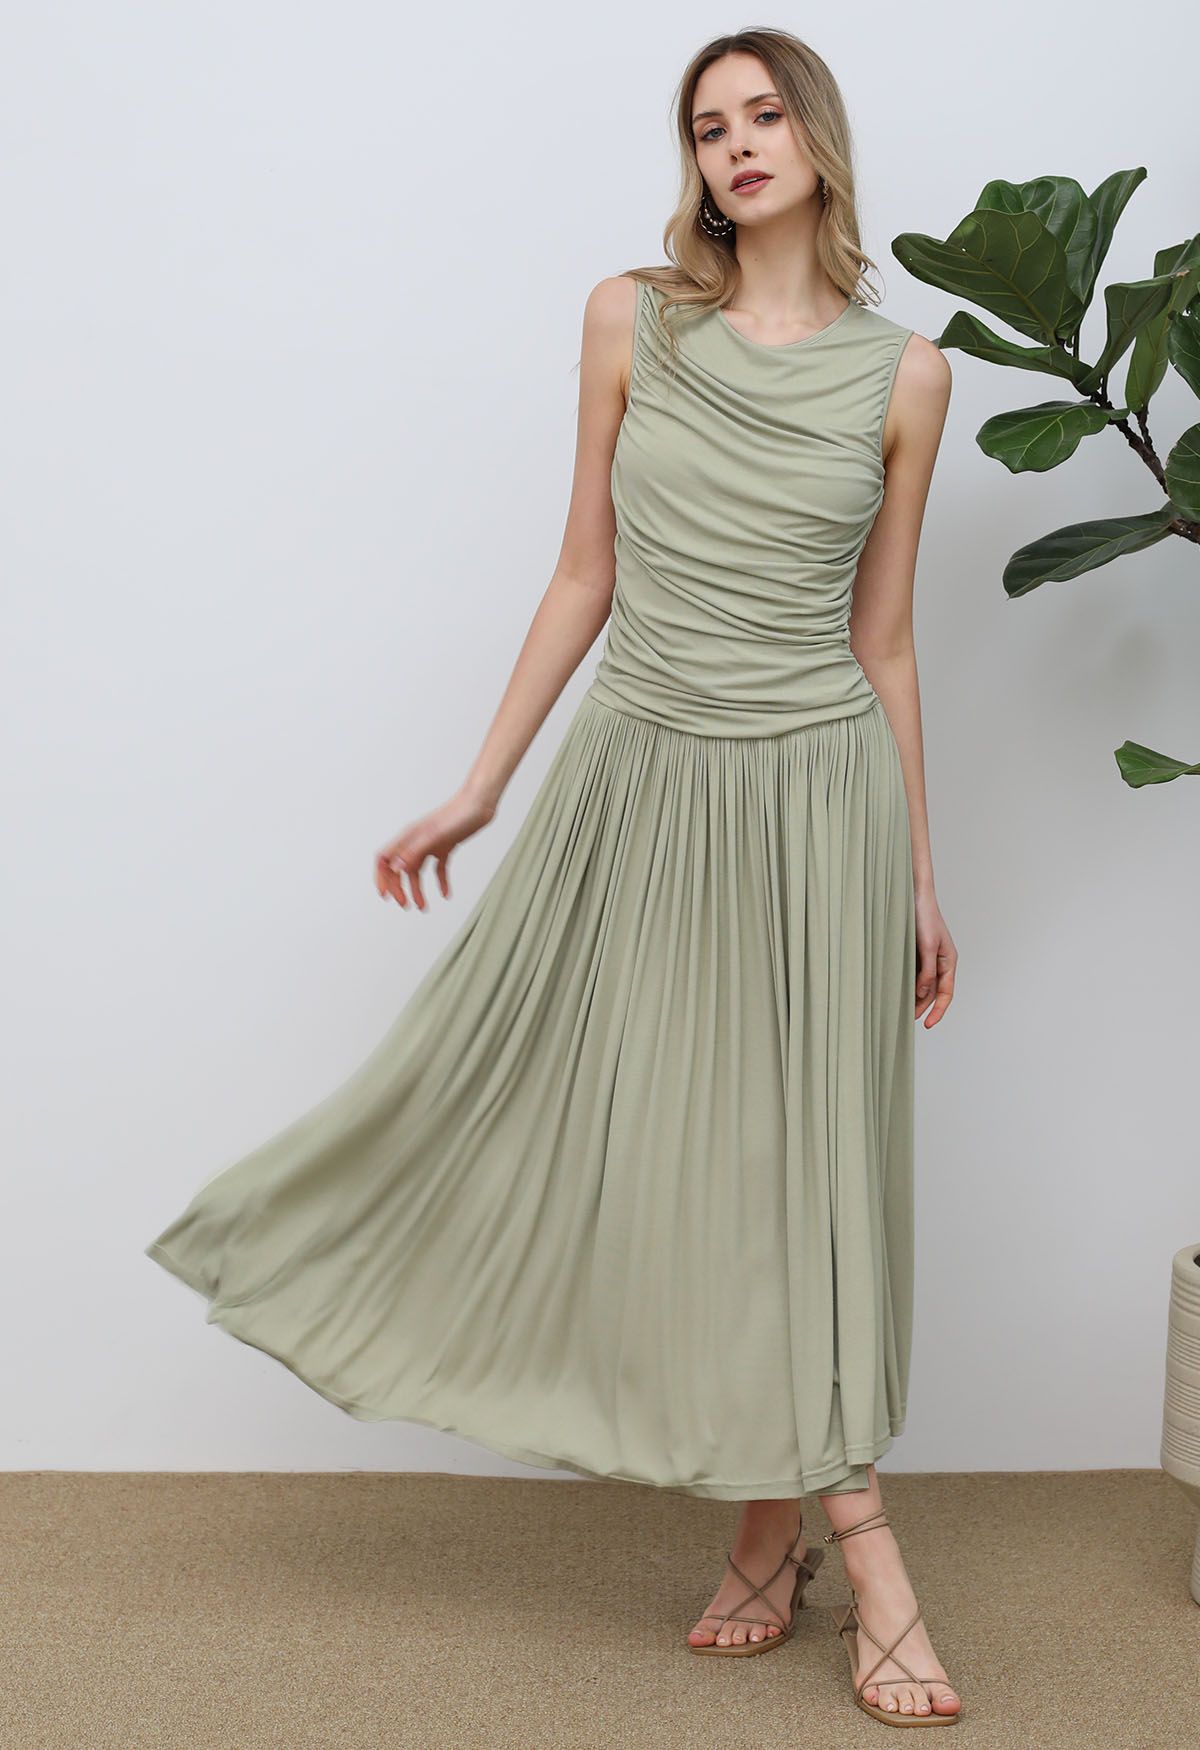 Effortless Ruched Sleeveless Cotton Dress in Pea Green